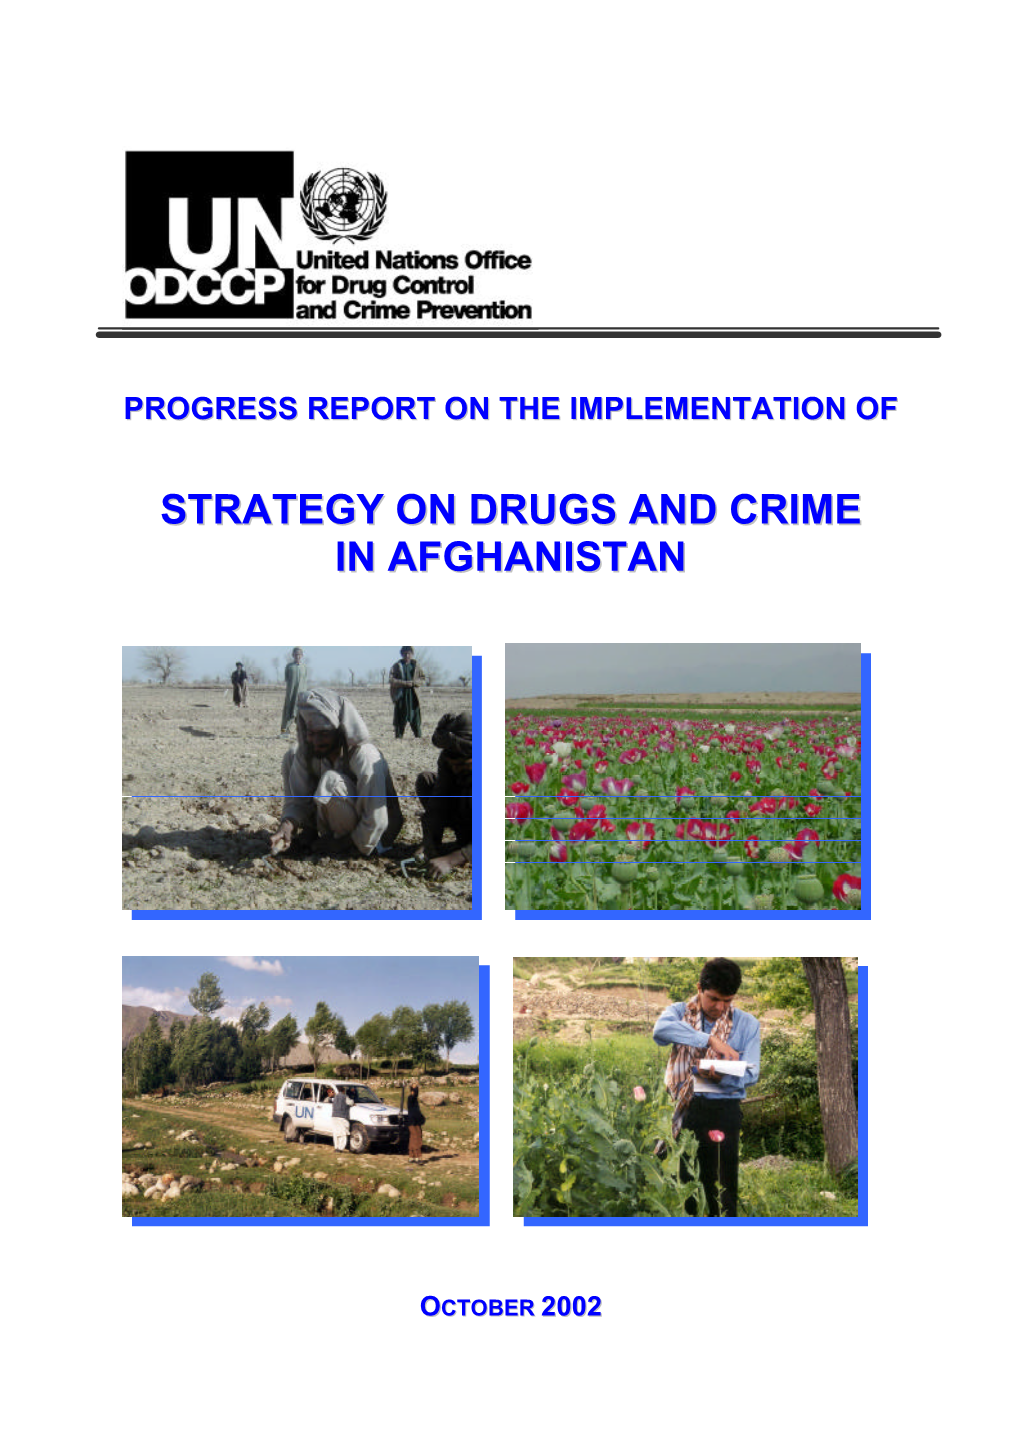 Strategy on Drugs and Crime in Afghanistan